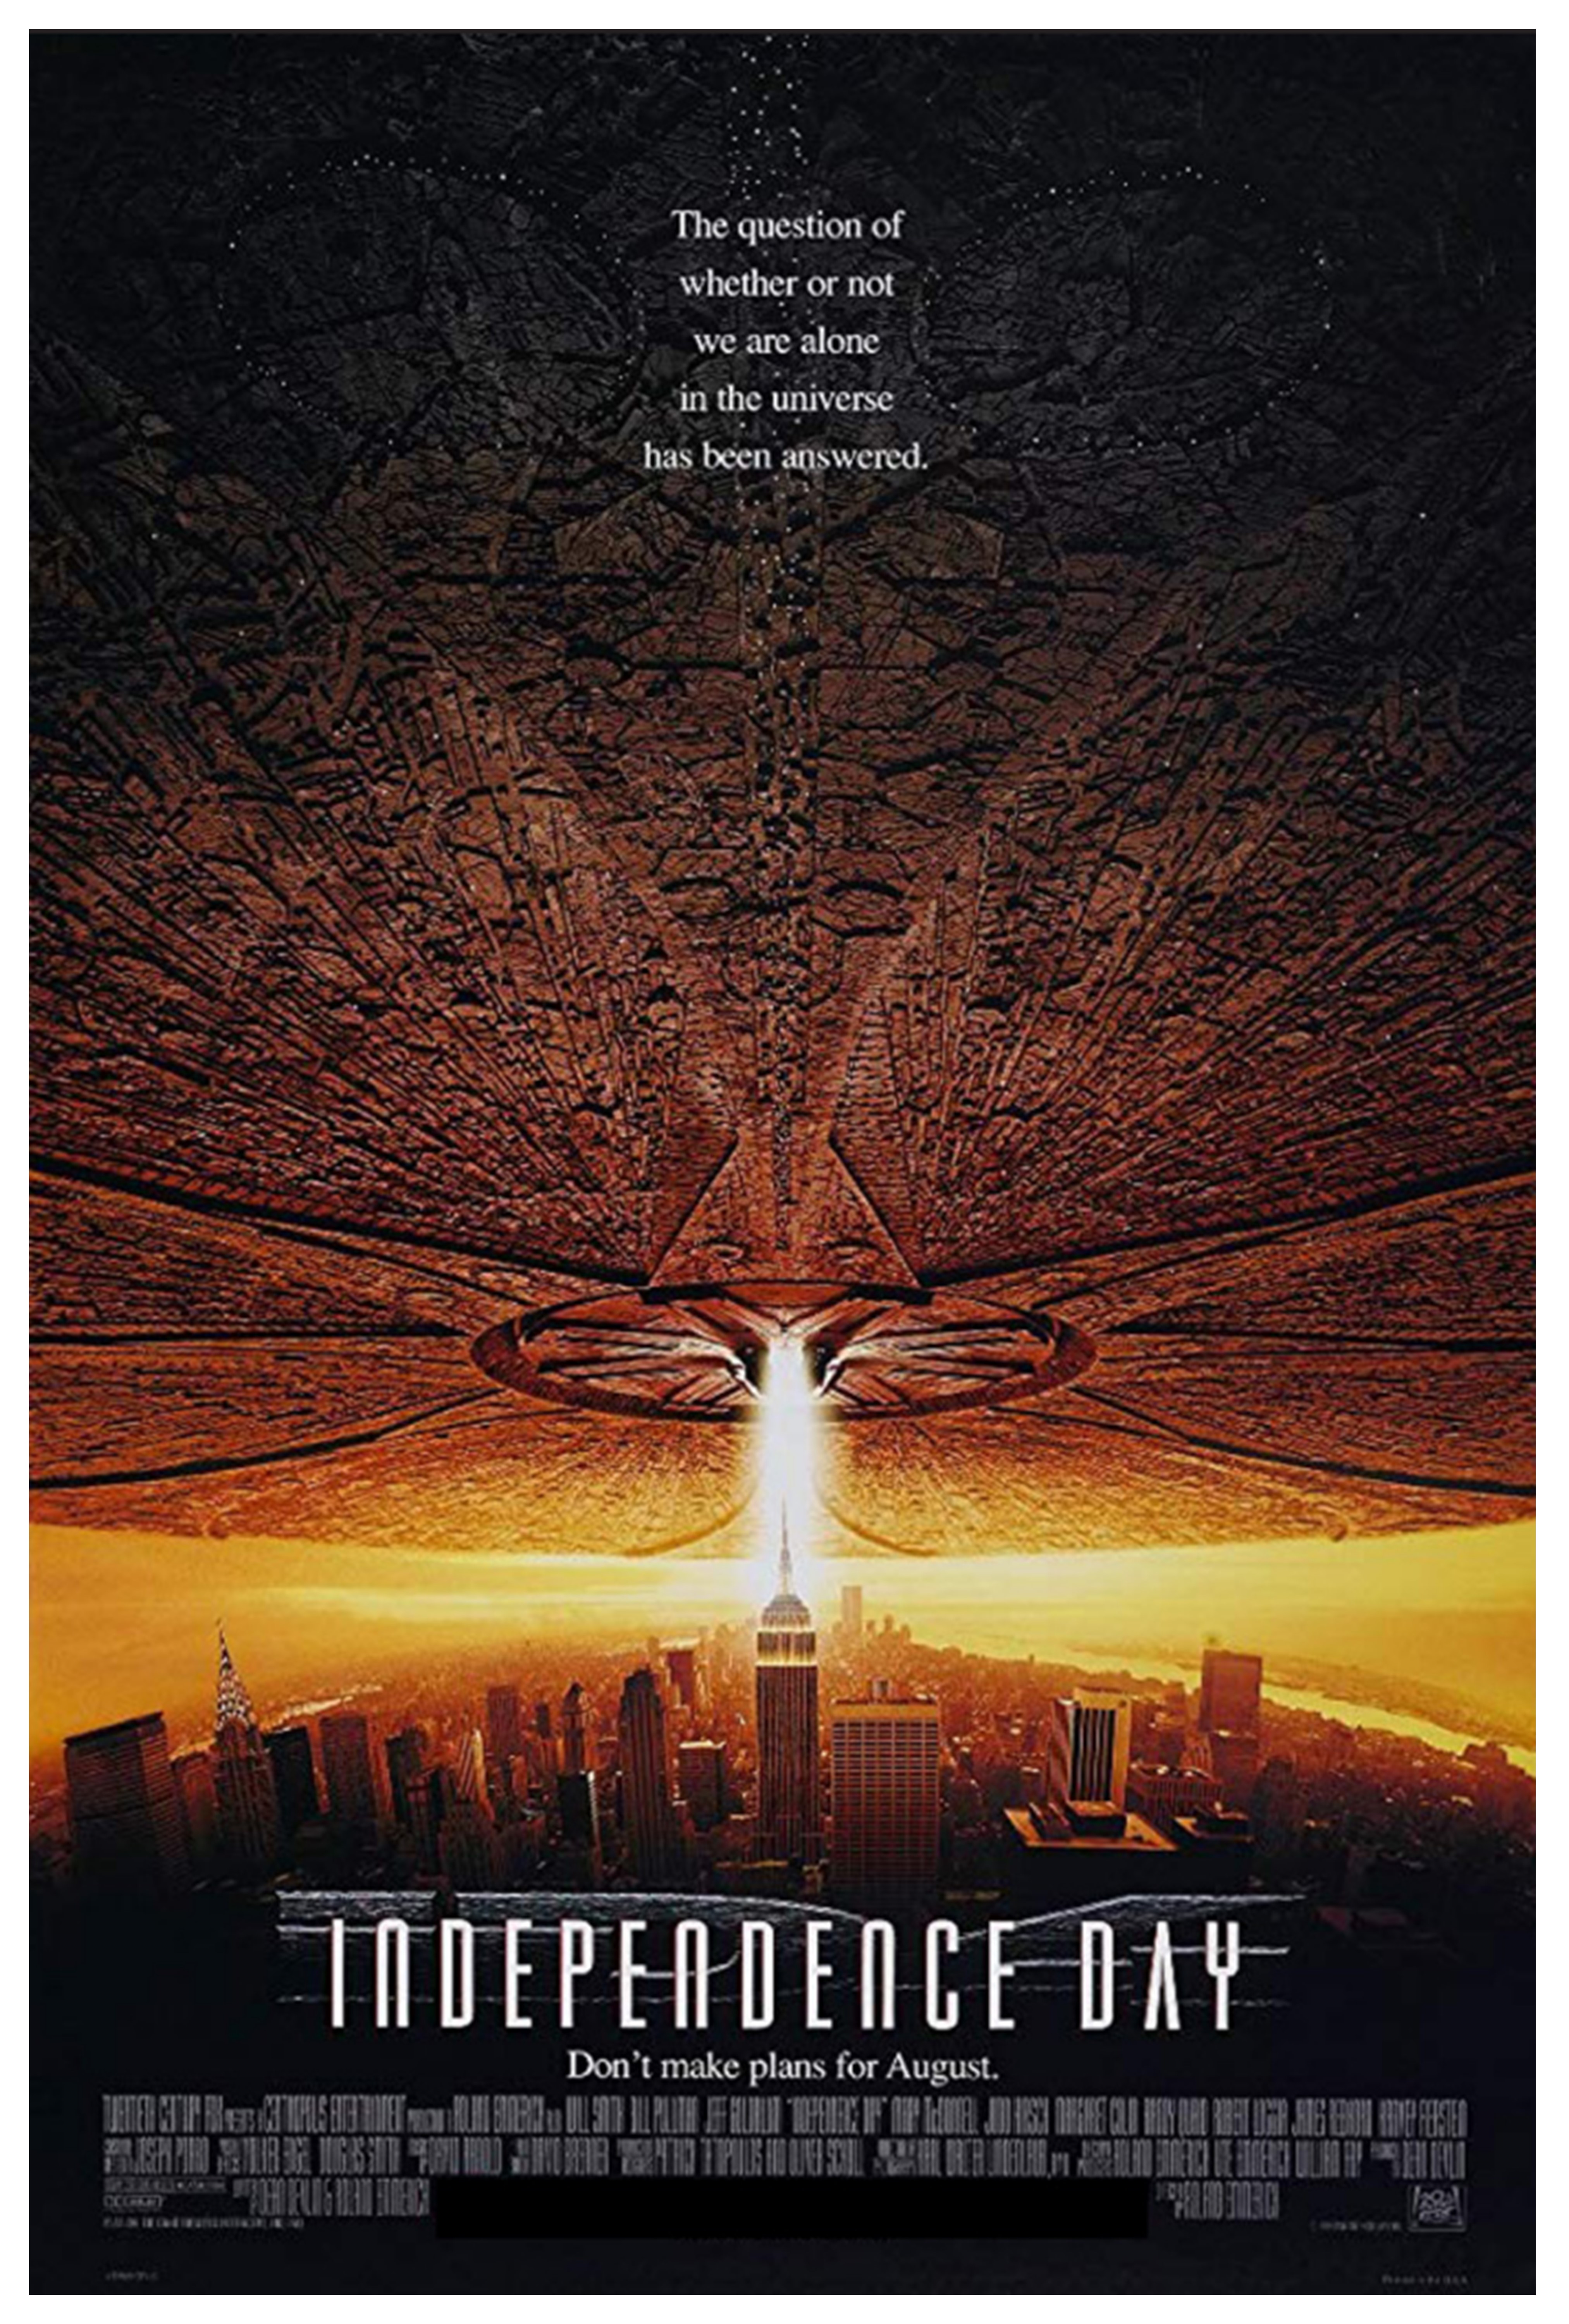 Film poster showing massive spaceship firing a large weapon at the Empire State Building.